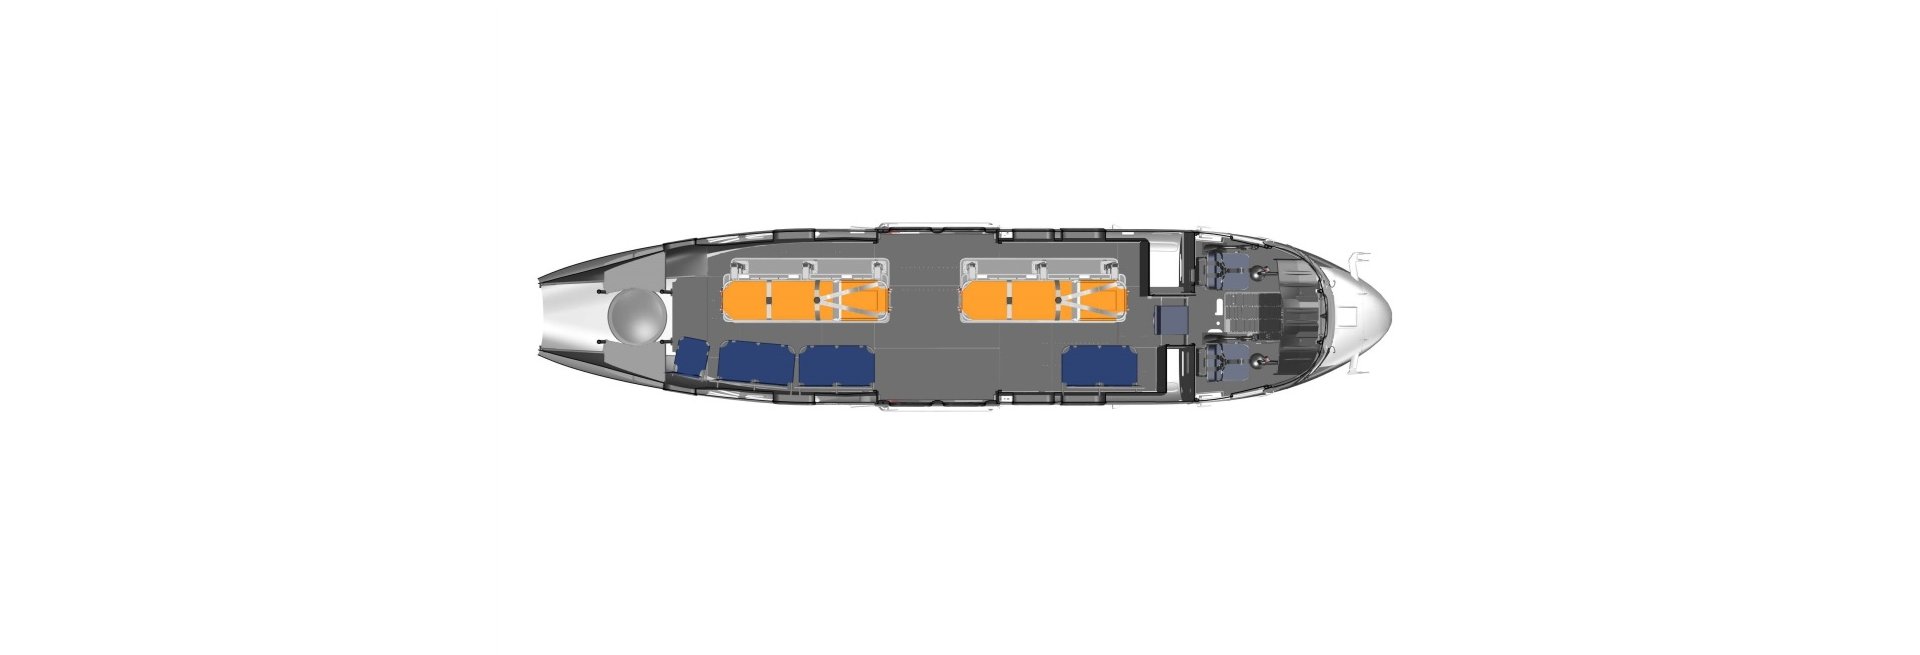 Diagram of an Airbus H215 helicopter cabin configured for casualty evacuation (Casevac) missions. 